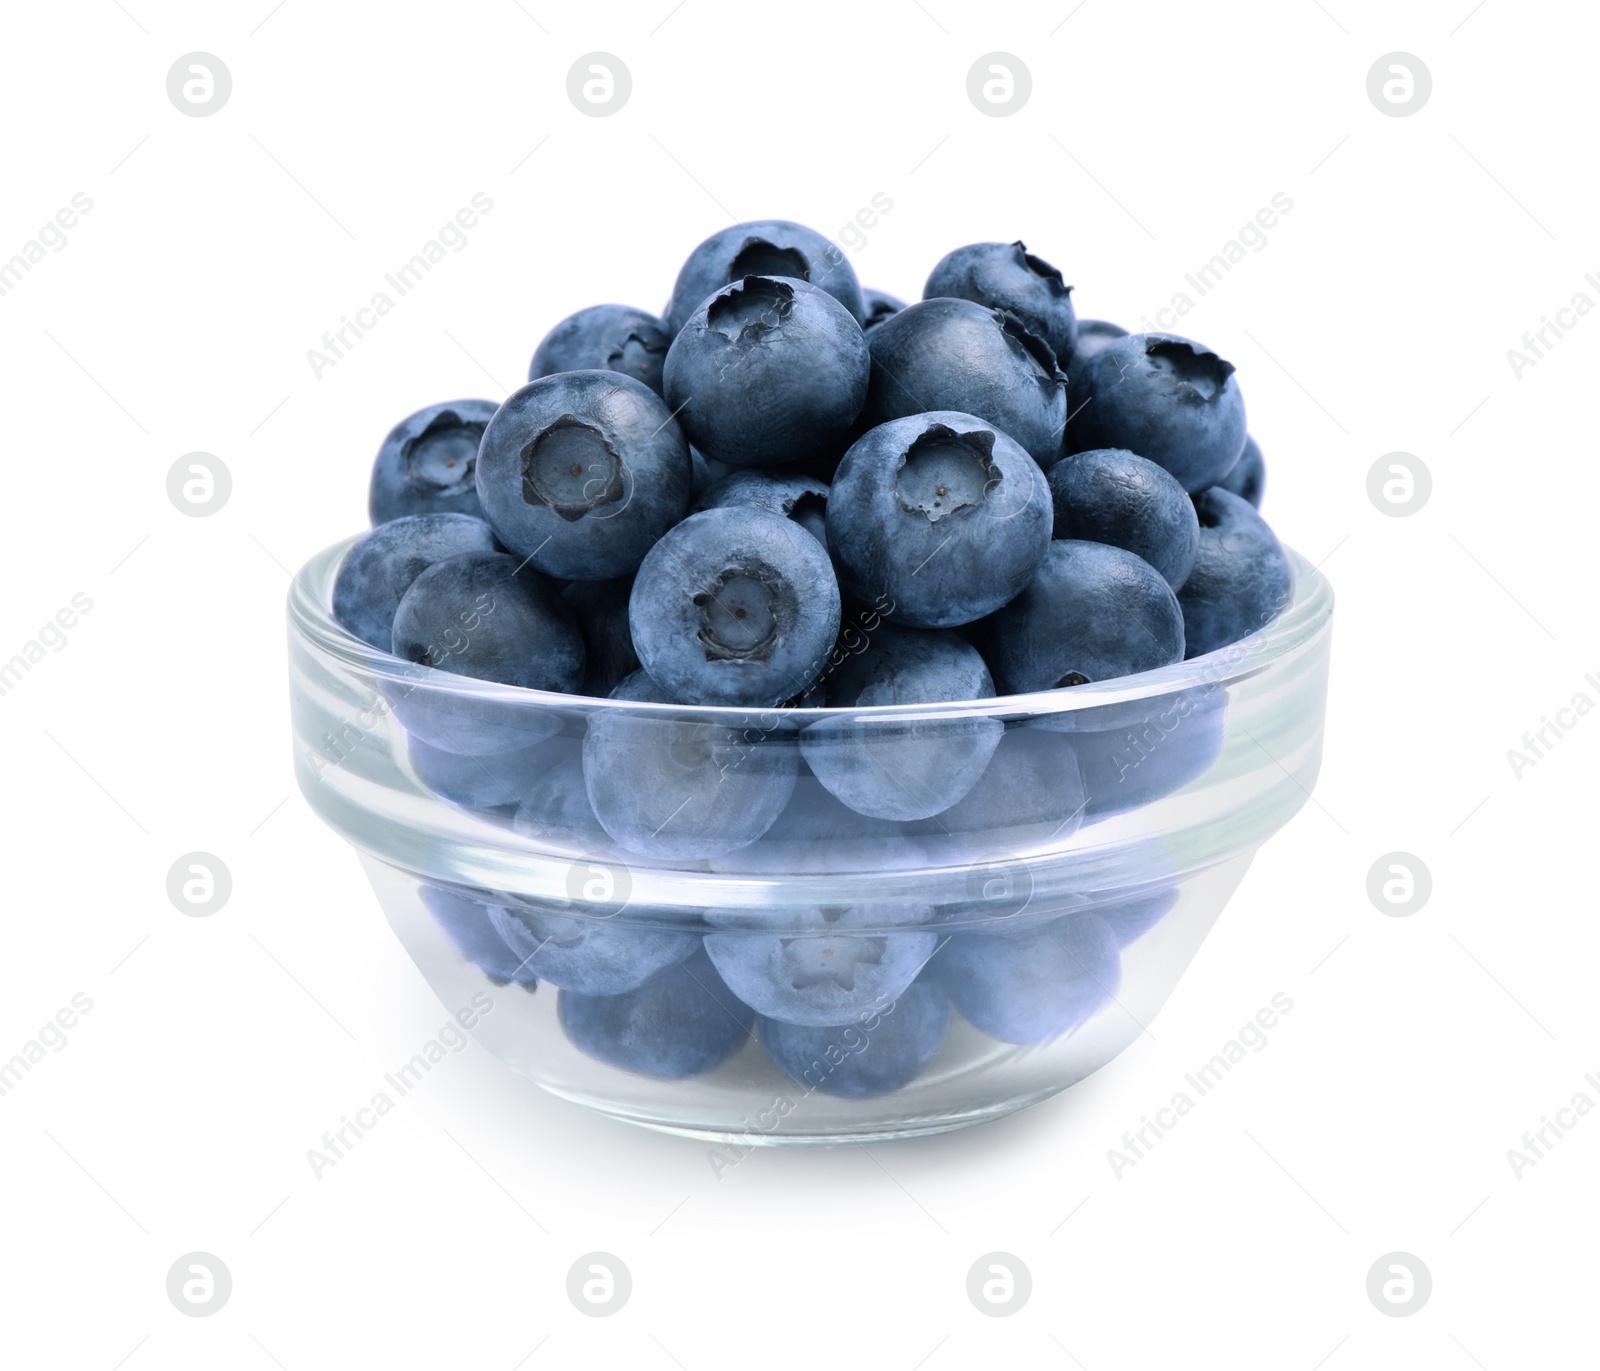 Photo of Fresh ripe blueberries in glass bowl on white background